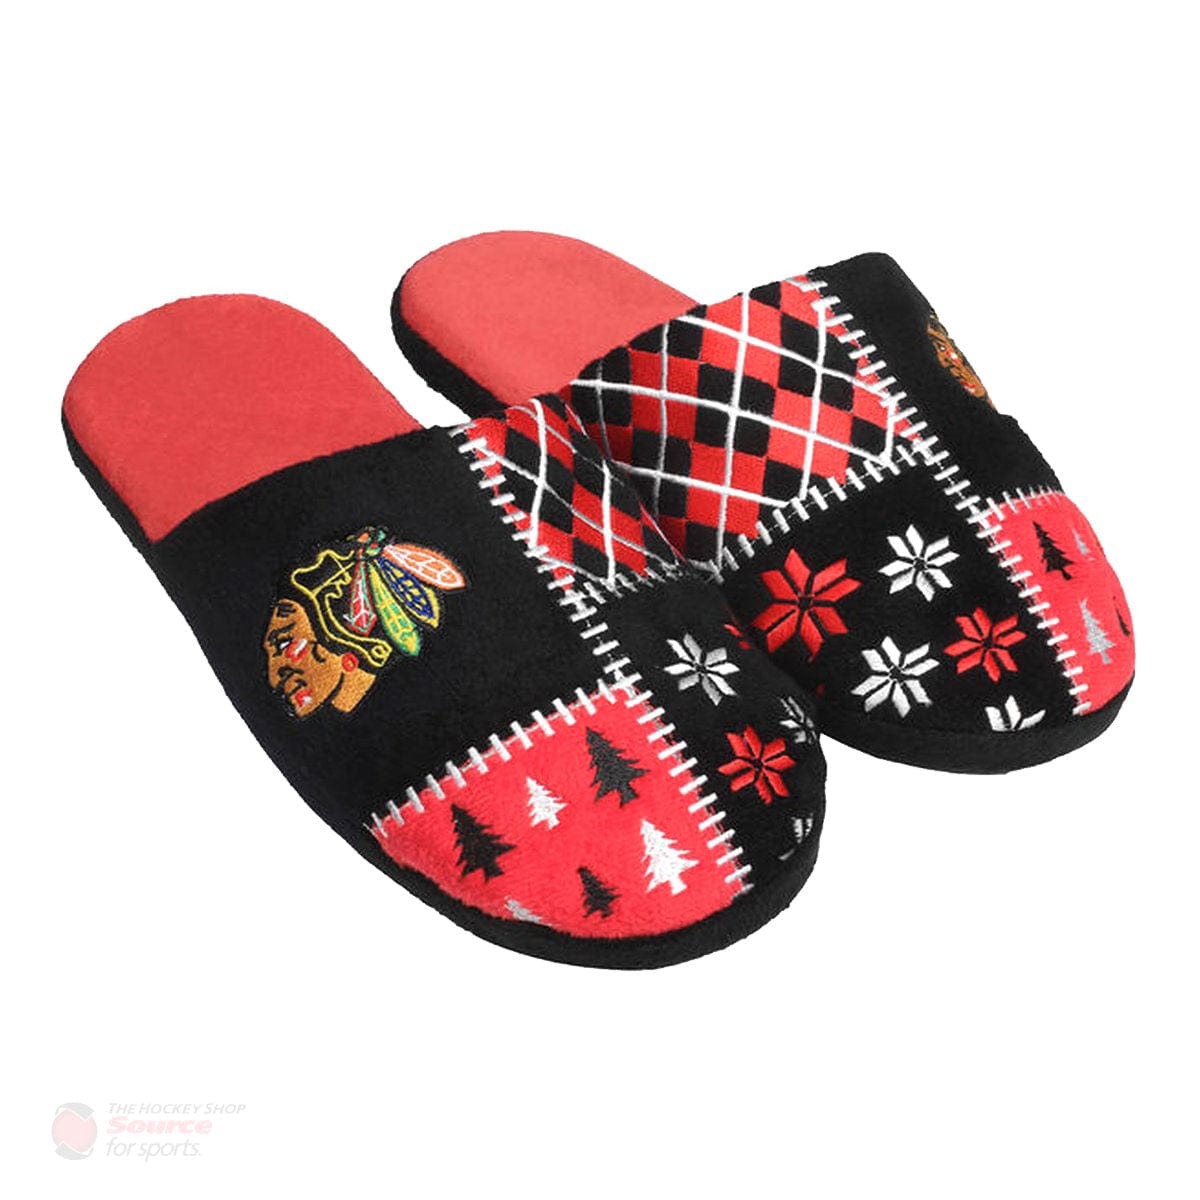 Outer Stuff NHL Ugly Slippers